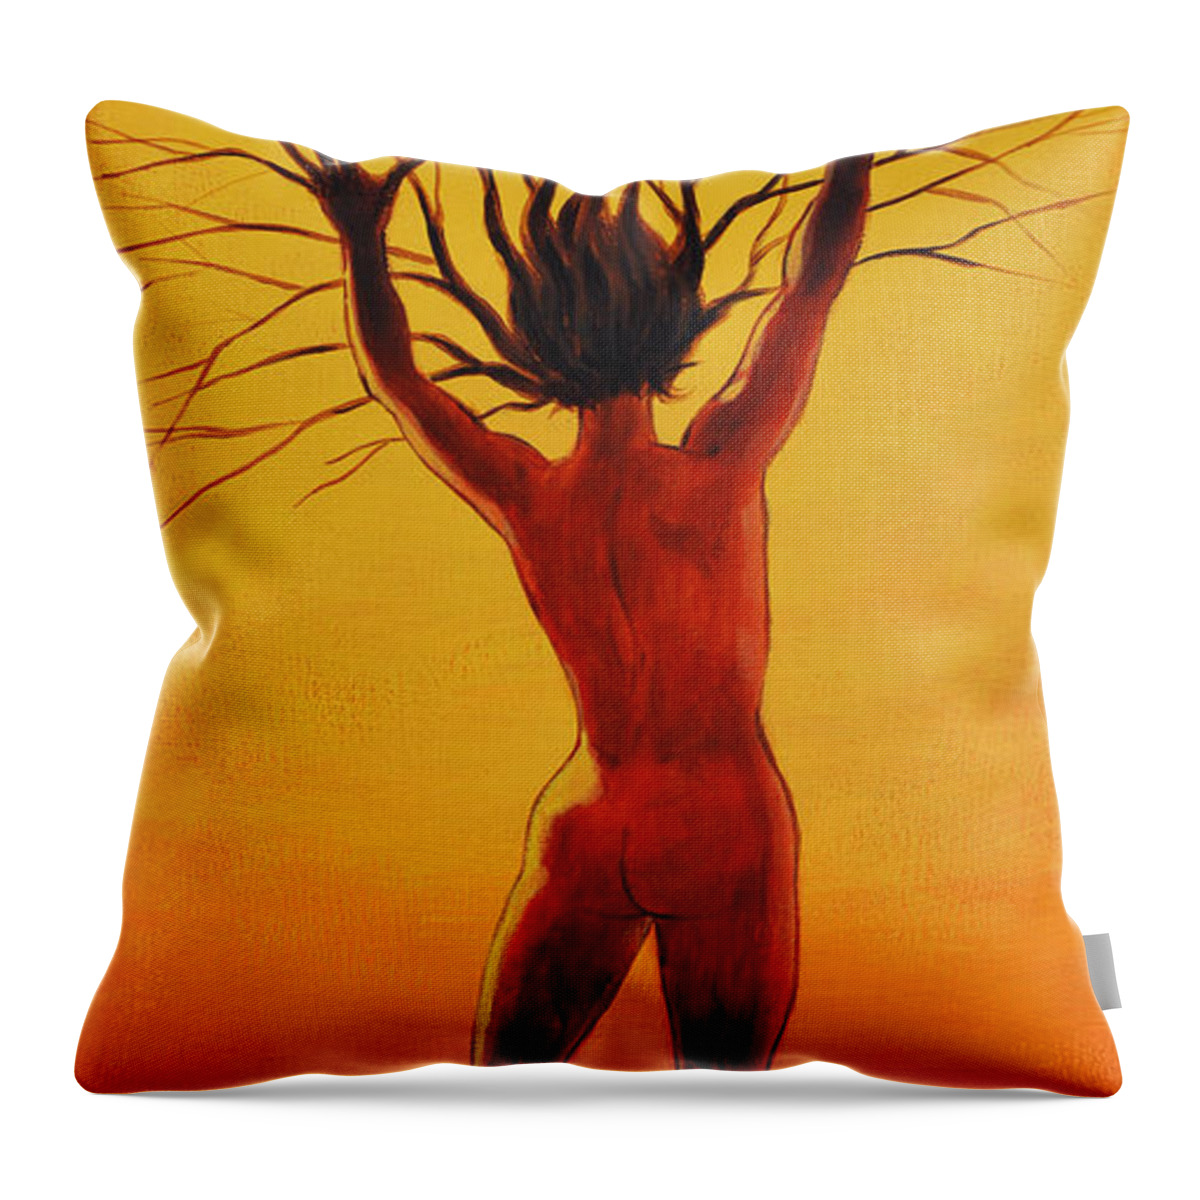 Fantasy Throw Pillow featuring the painting Dryad by Glenn Pollard